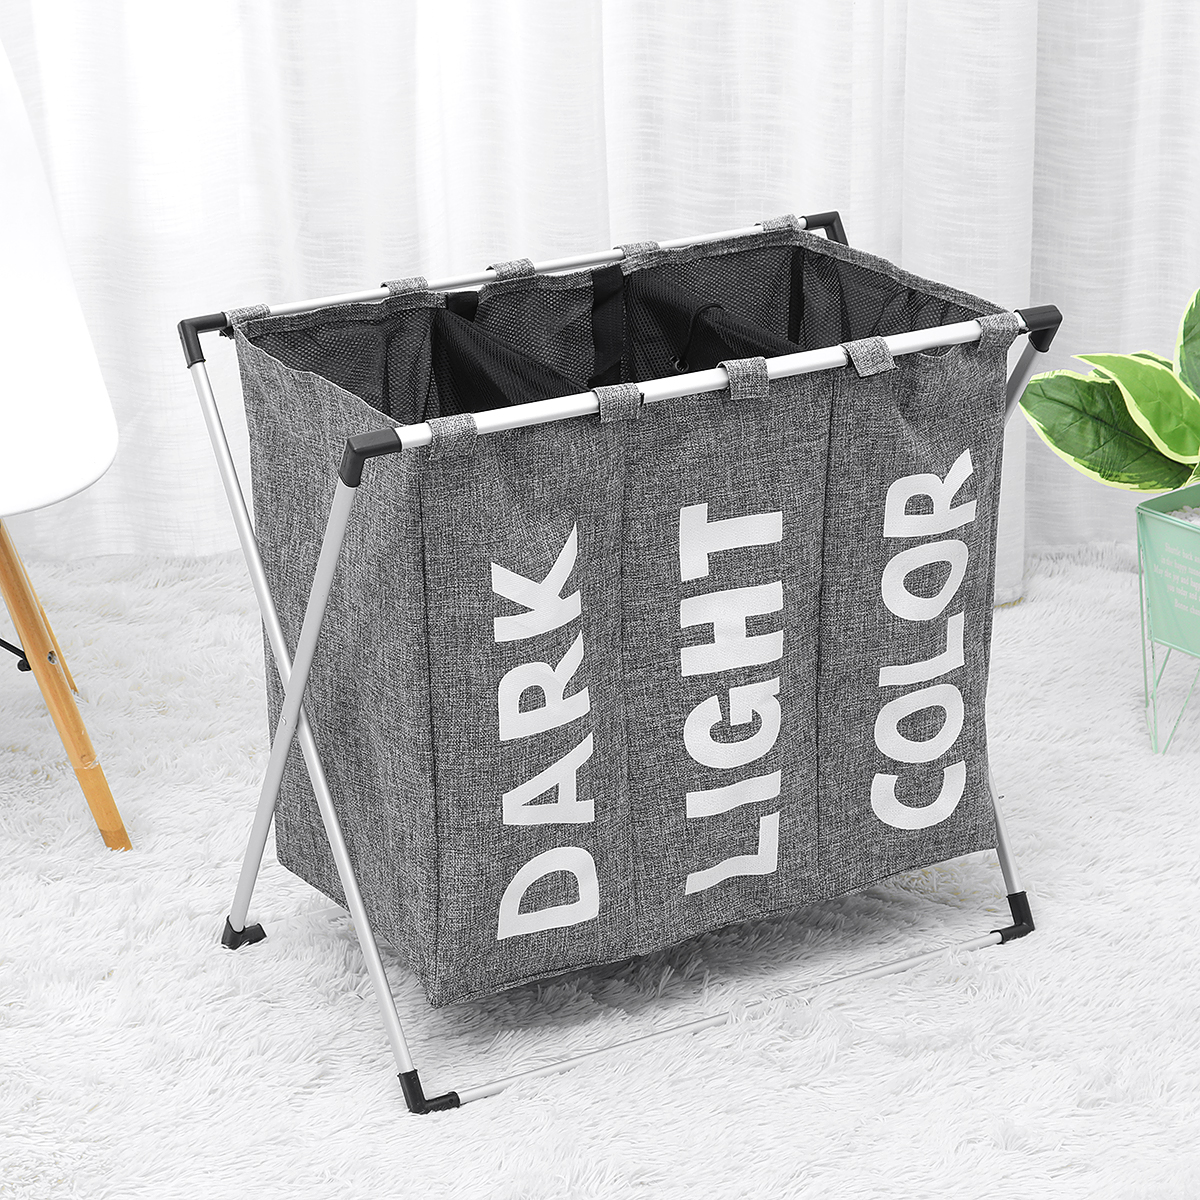 Foldable-Laundry-Basket-Folding-Dirty-Clothes-Bag-Washing-Bin-Home-Clothes-Organizer-with-Handle-1785430-12